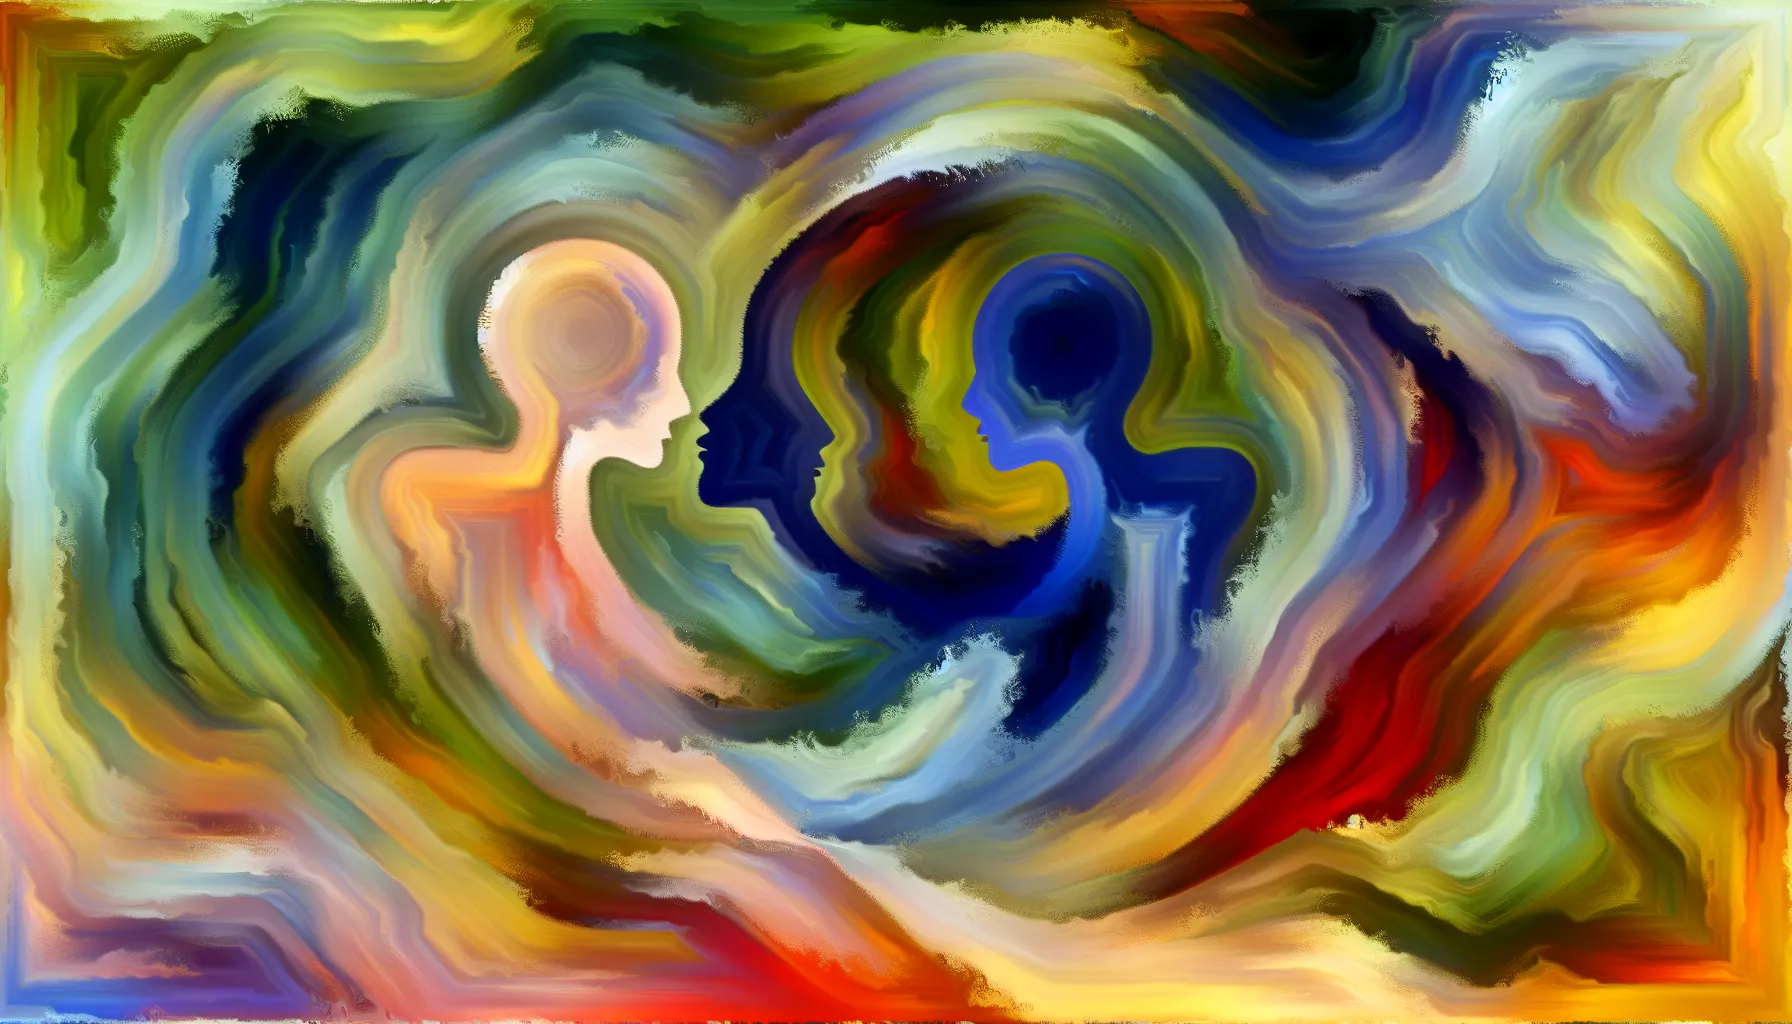 <strong>Where Paths Converge:</strong> The fusion of hues in this artwork mirrors the rush of emotions on a first date, where every color tells a story of hope, curiosity, and the infinite potential of a shared journey.